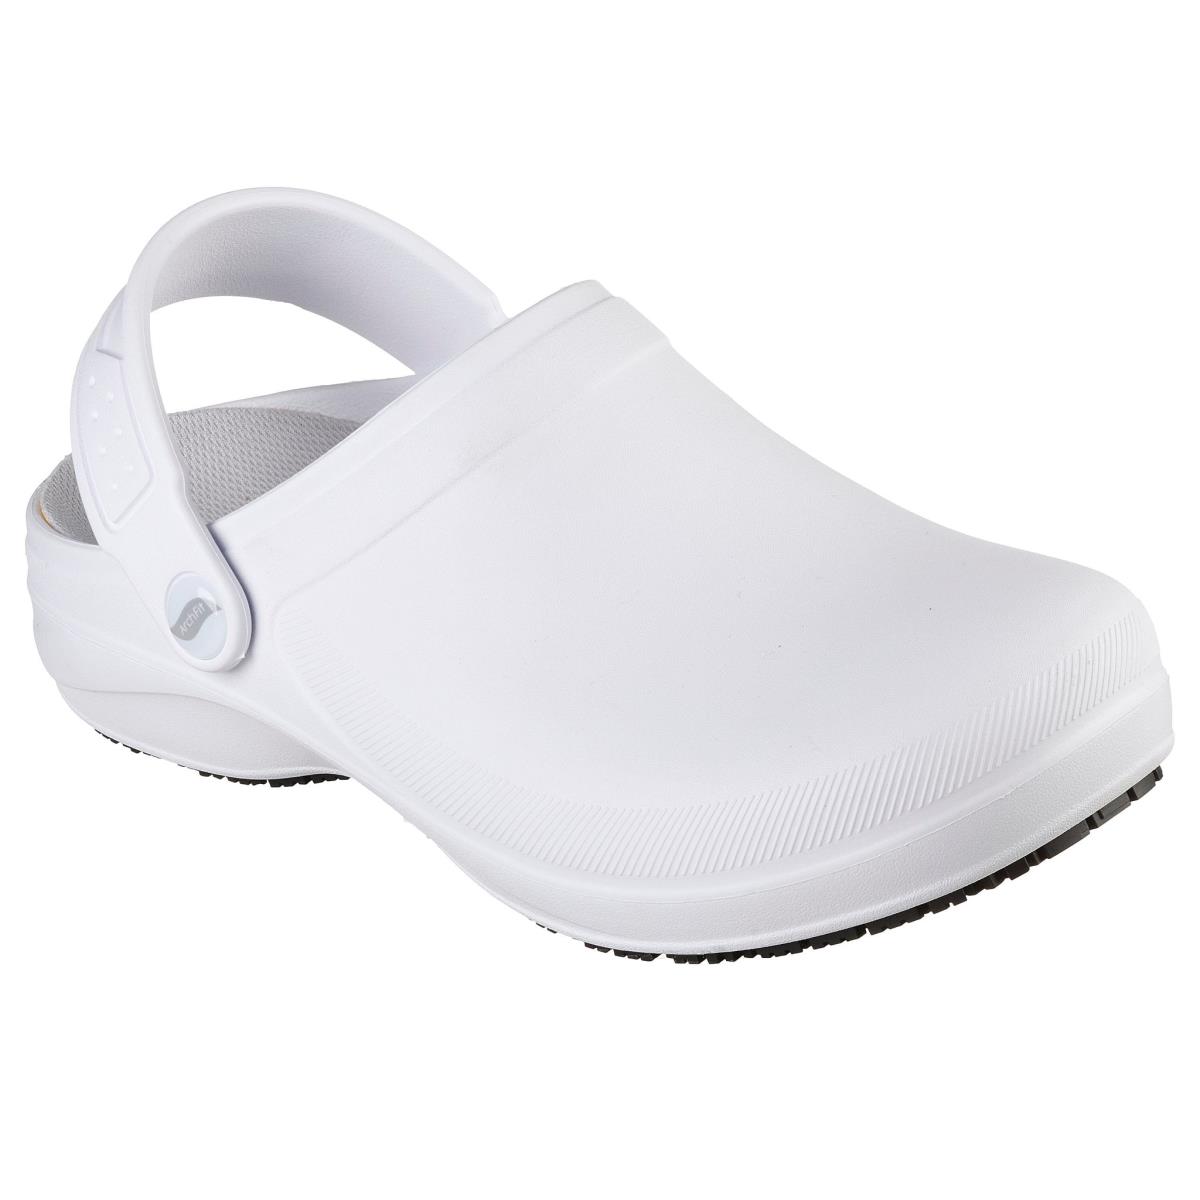 Skechers Womens 108067 Arch Fit Riverbound Pasay Slip Resistant Work Shoes Clogs - White